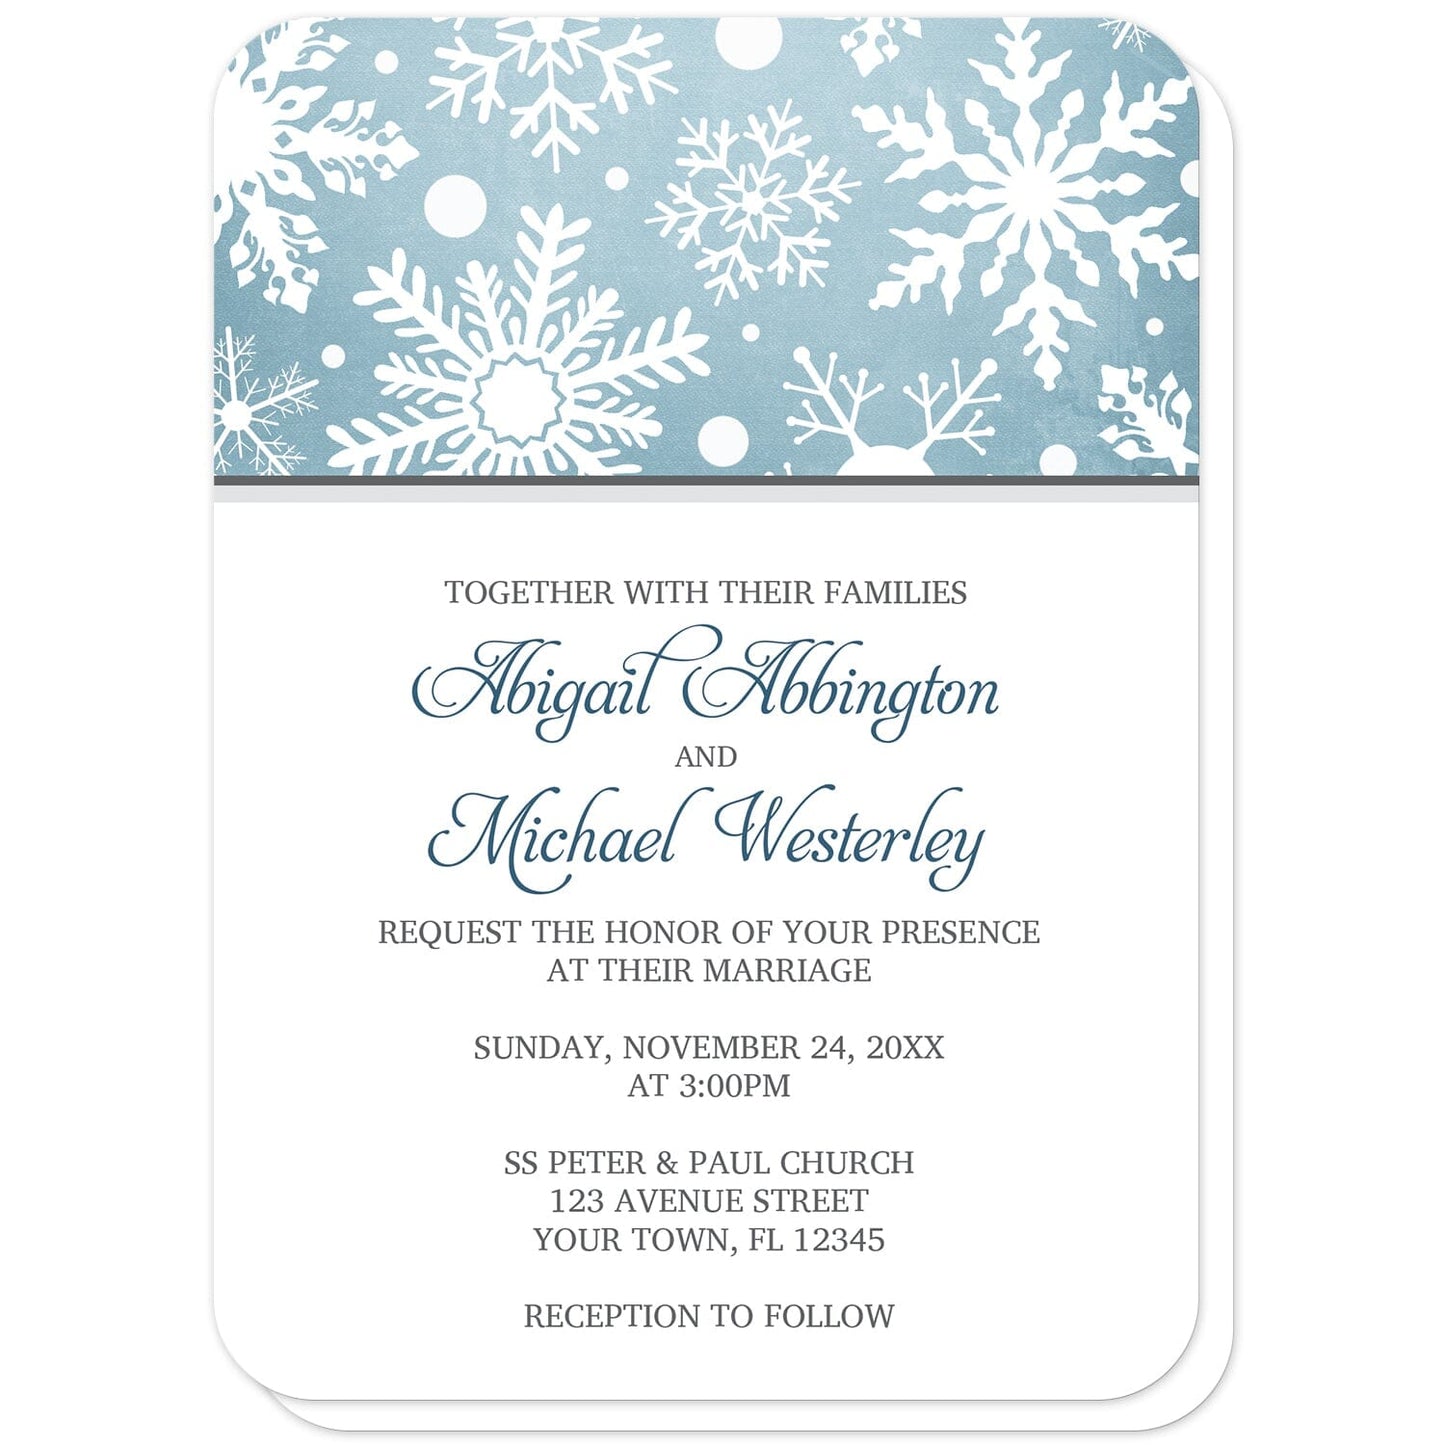 Winter Snowflake Blue with Gray Wedding Invitations (with rounded corners) at Artistically Invited. Modern winter snowflake blue with gray wedding invitations designed with a white snowflakes pattern over an organic blue wintry background at the top of the invitations. Your personalized marriage celebration details are custom printed in blue and gray on white below the snowflakes. 